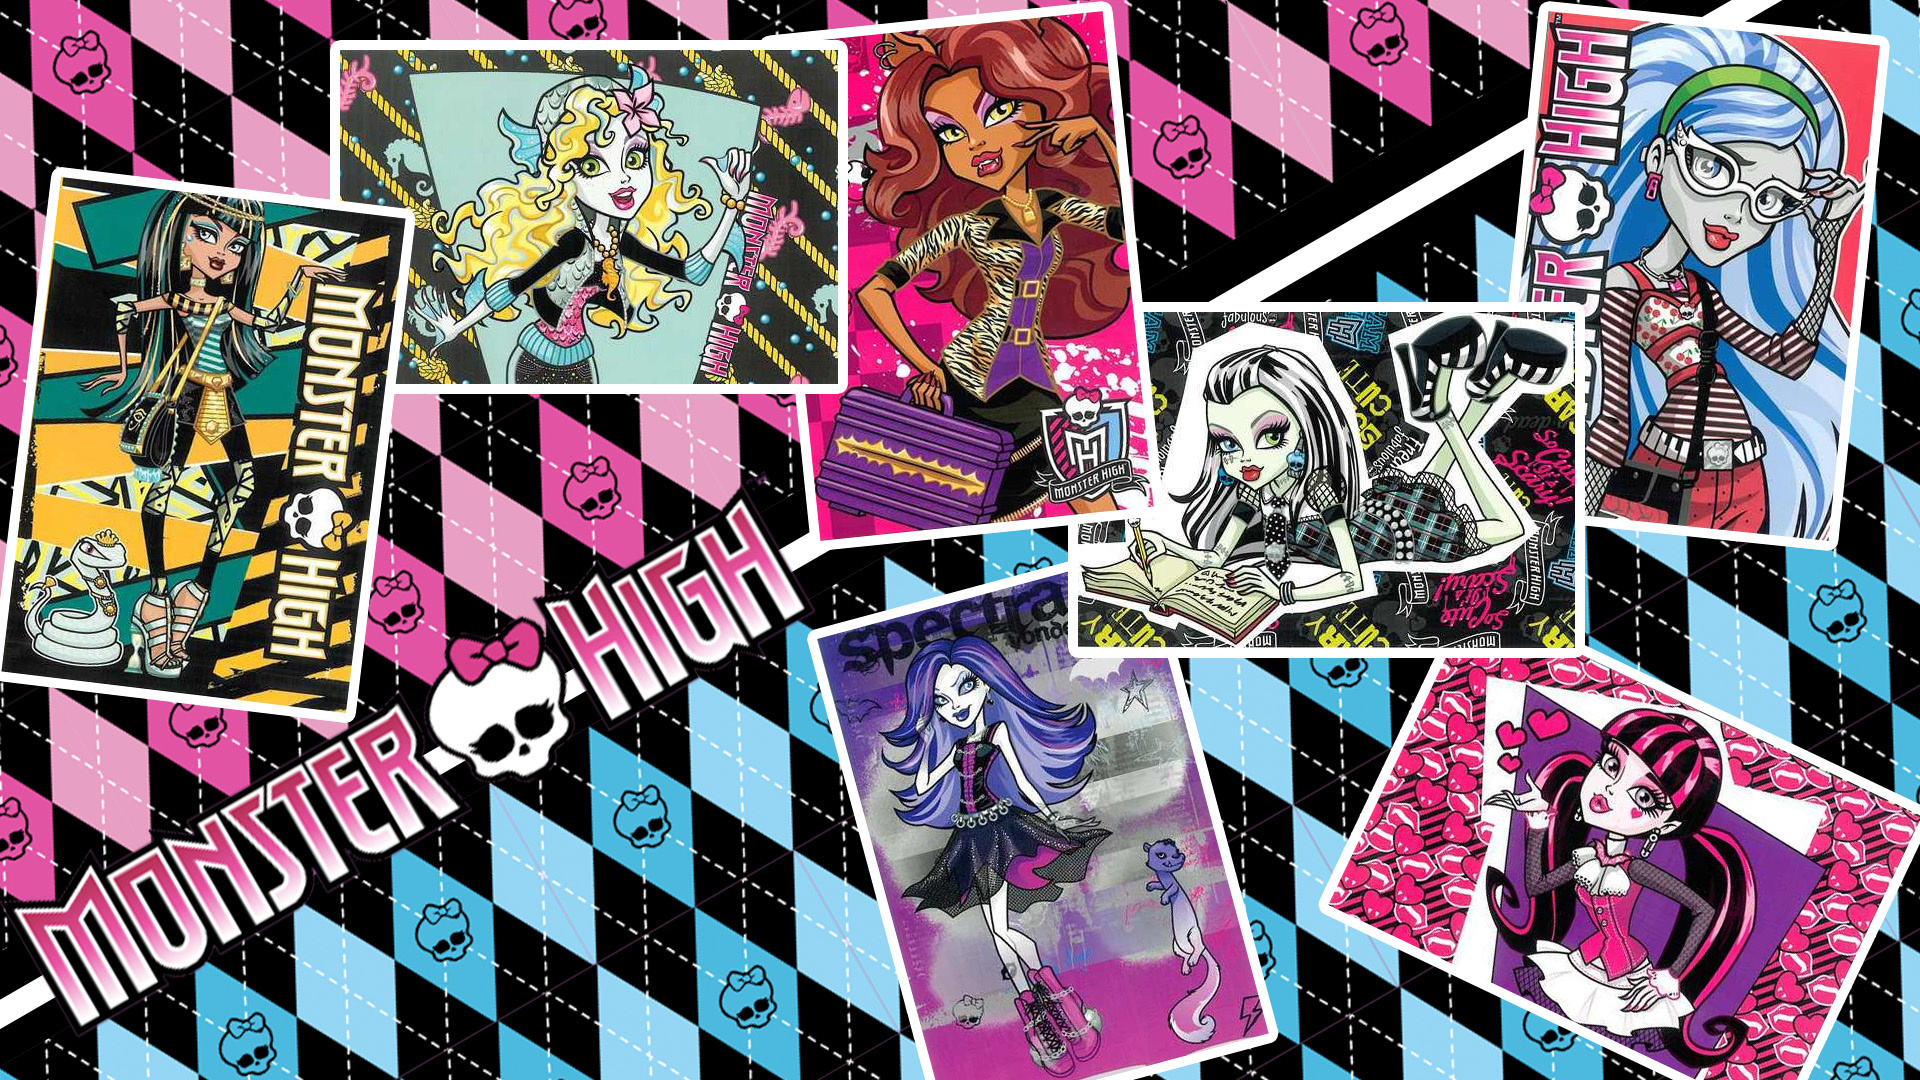 Monster High: An animated web series based on the eponymous fashion doll line created by Mattel. 1920x1080 Full HD Background.